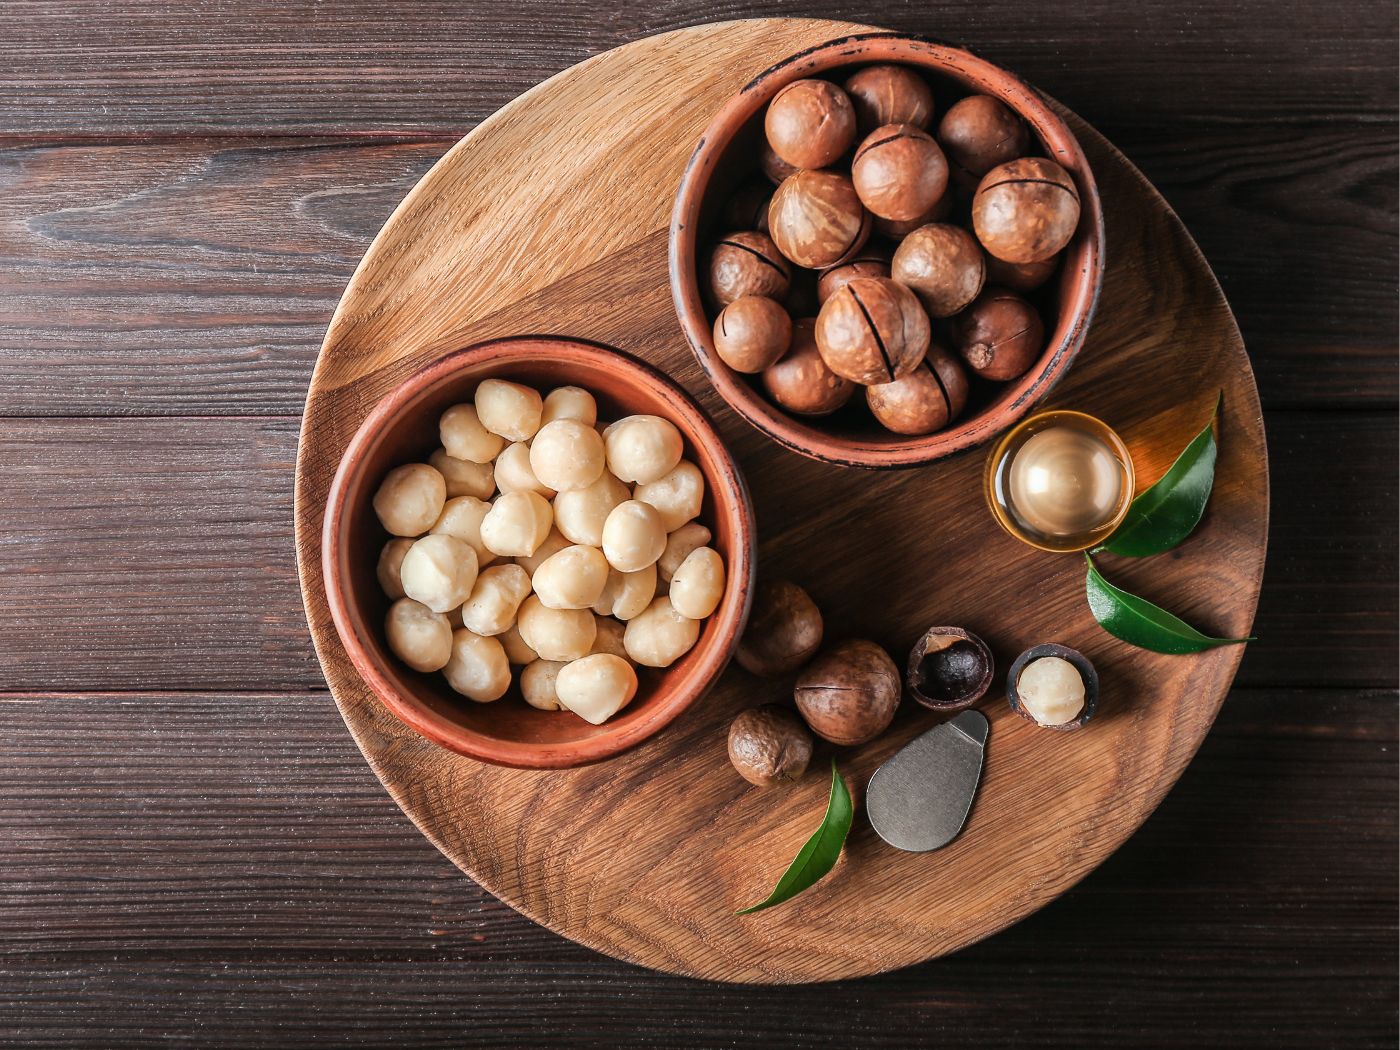 Macadamia Oil - The New And Trending Superfood For The Skin!